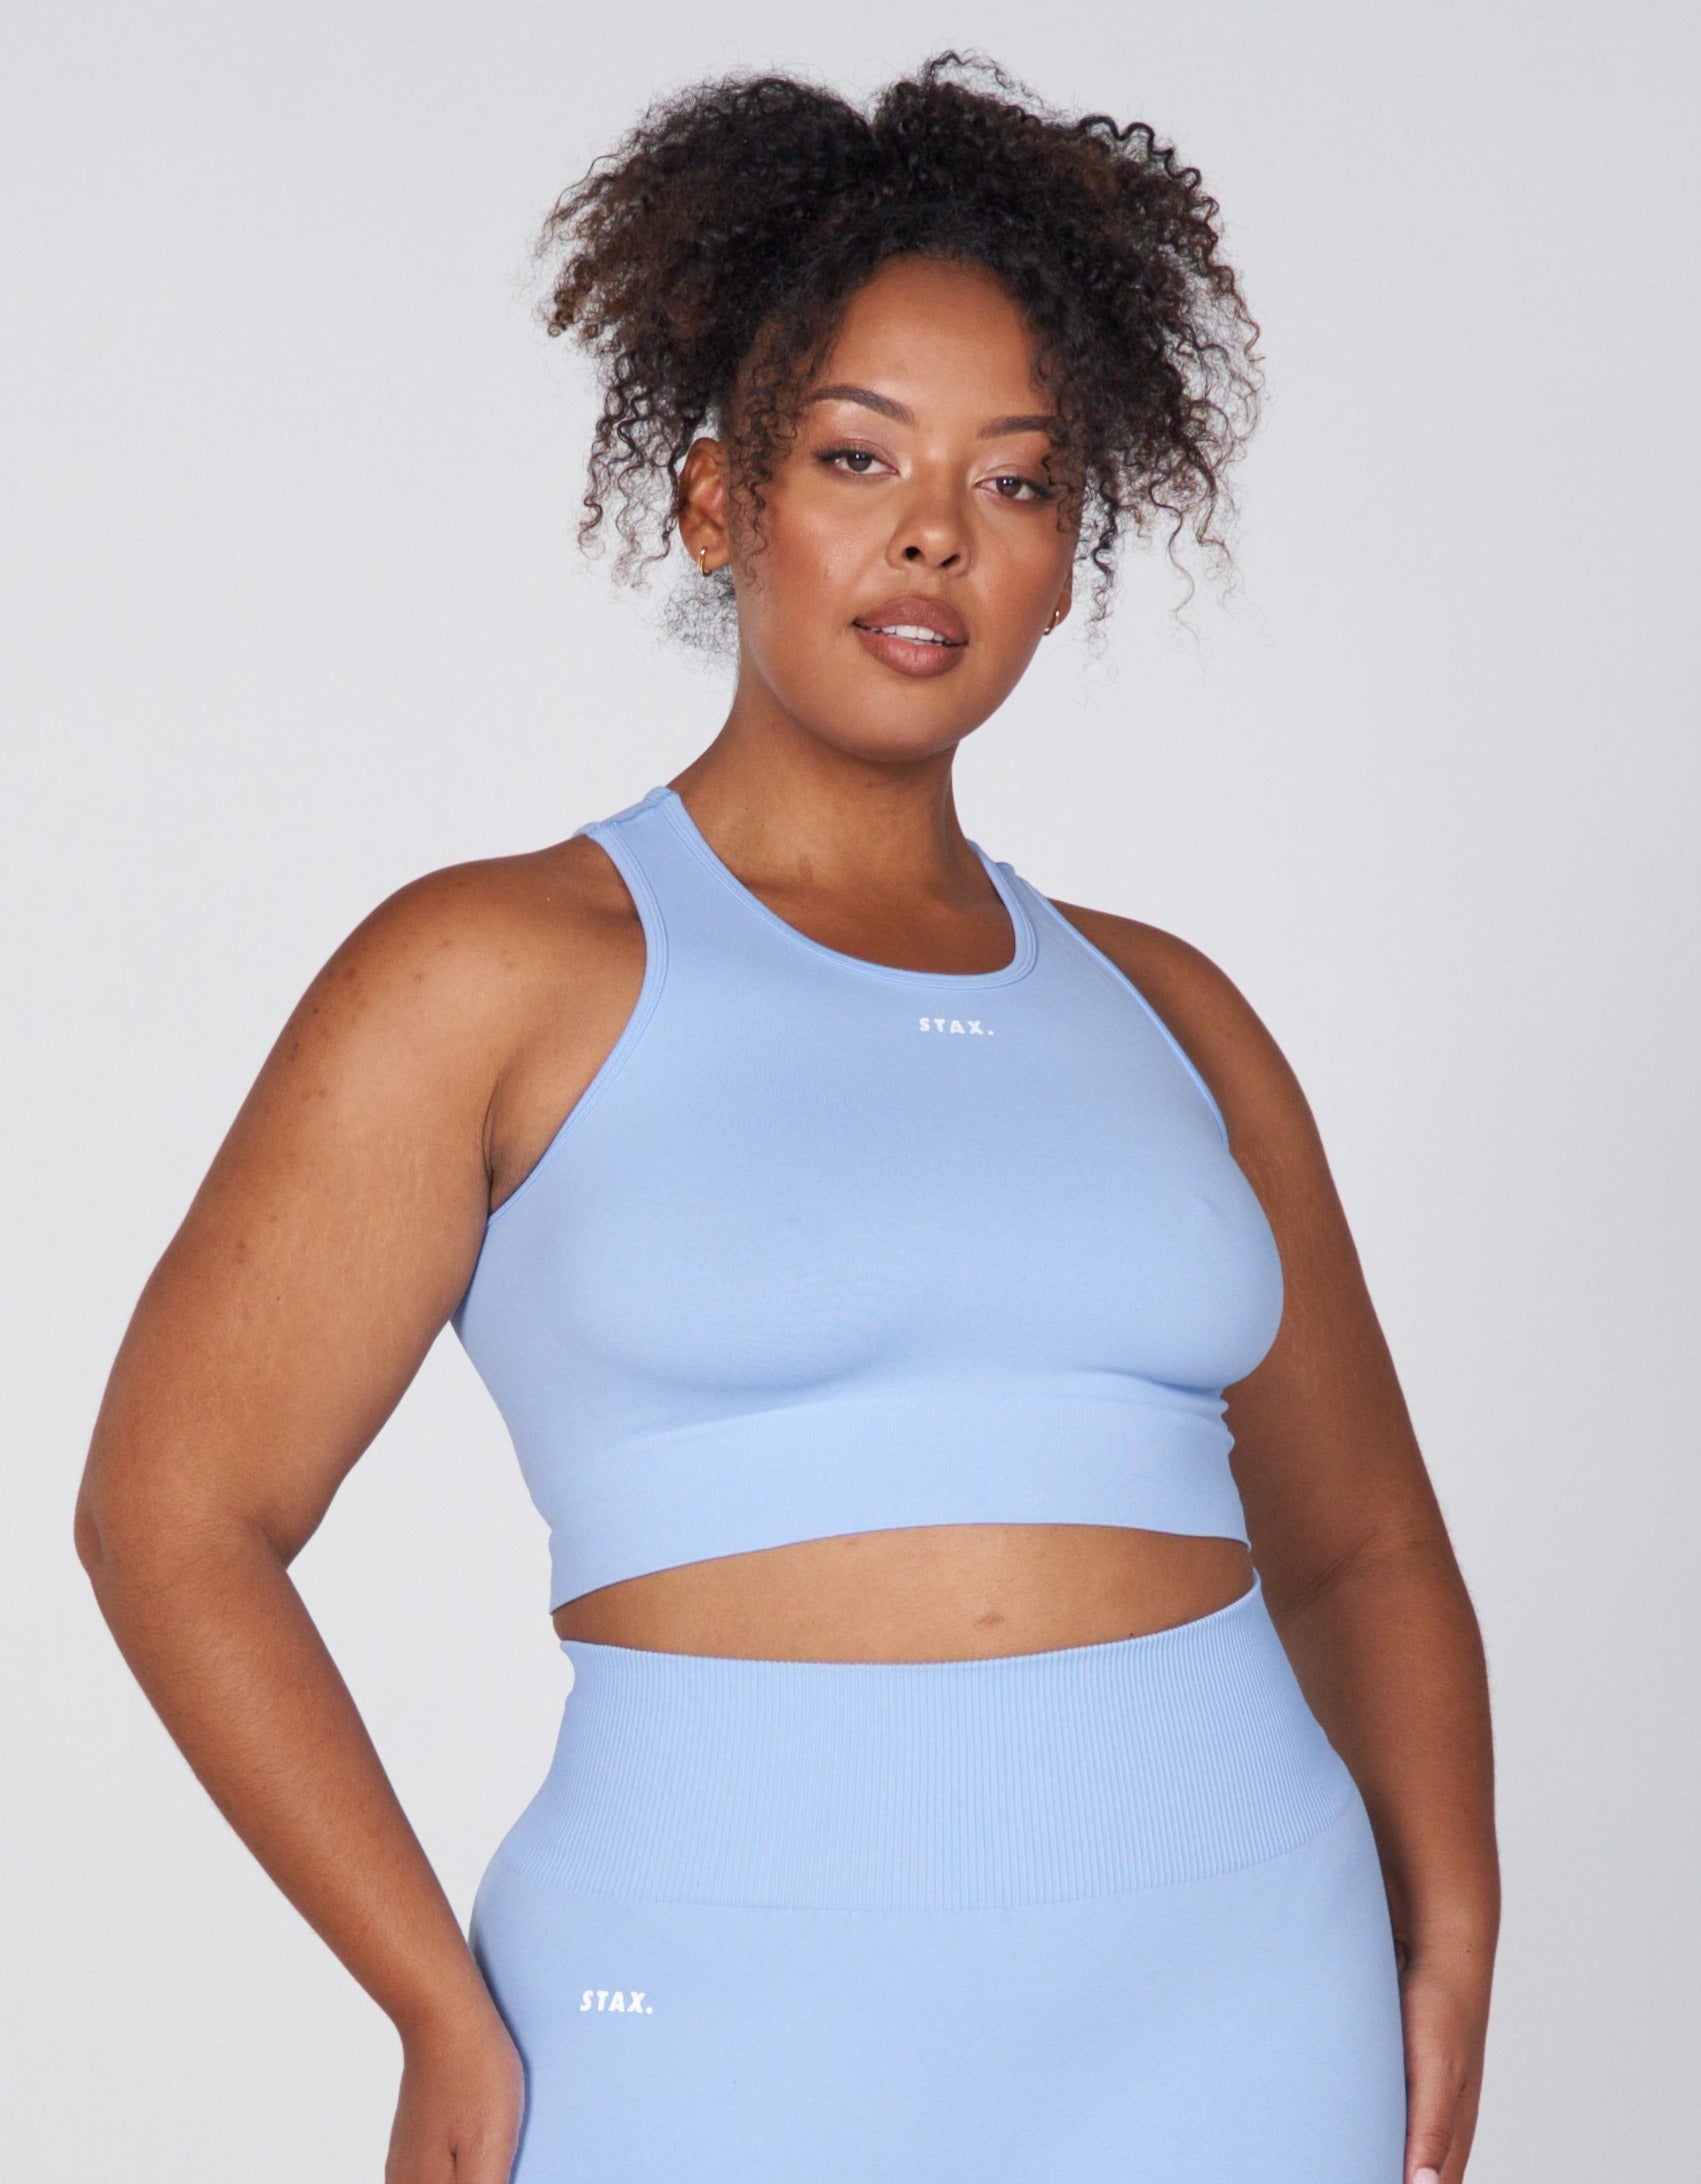 stax-psf-cropped-singlet-baby-blue